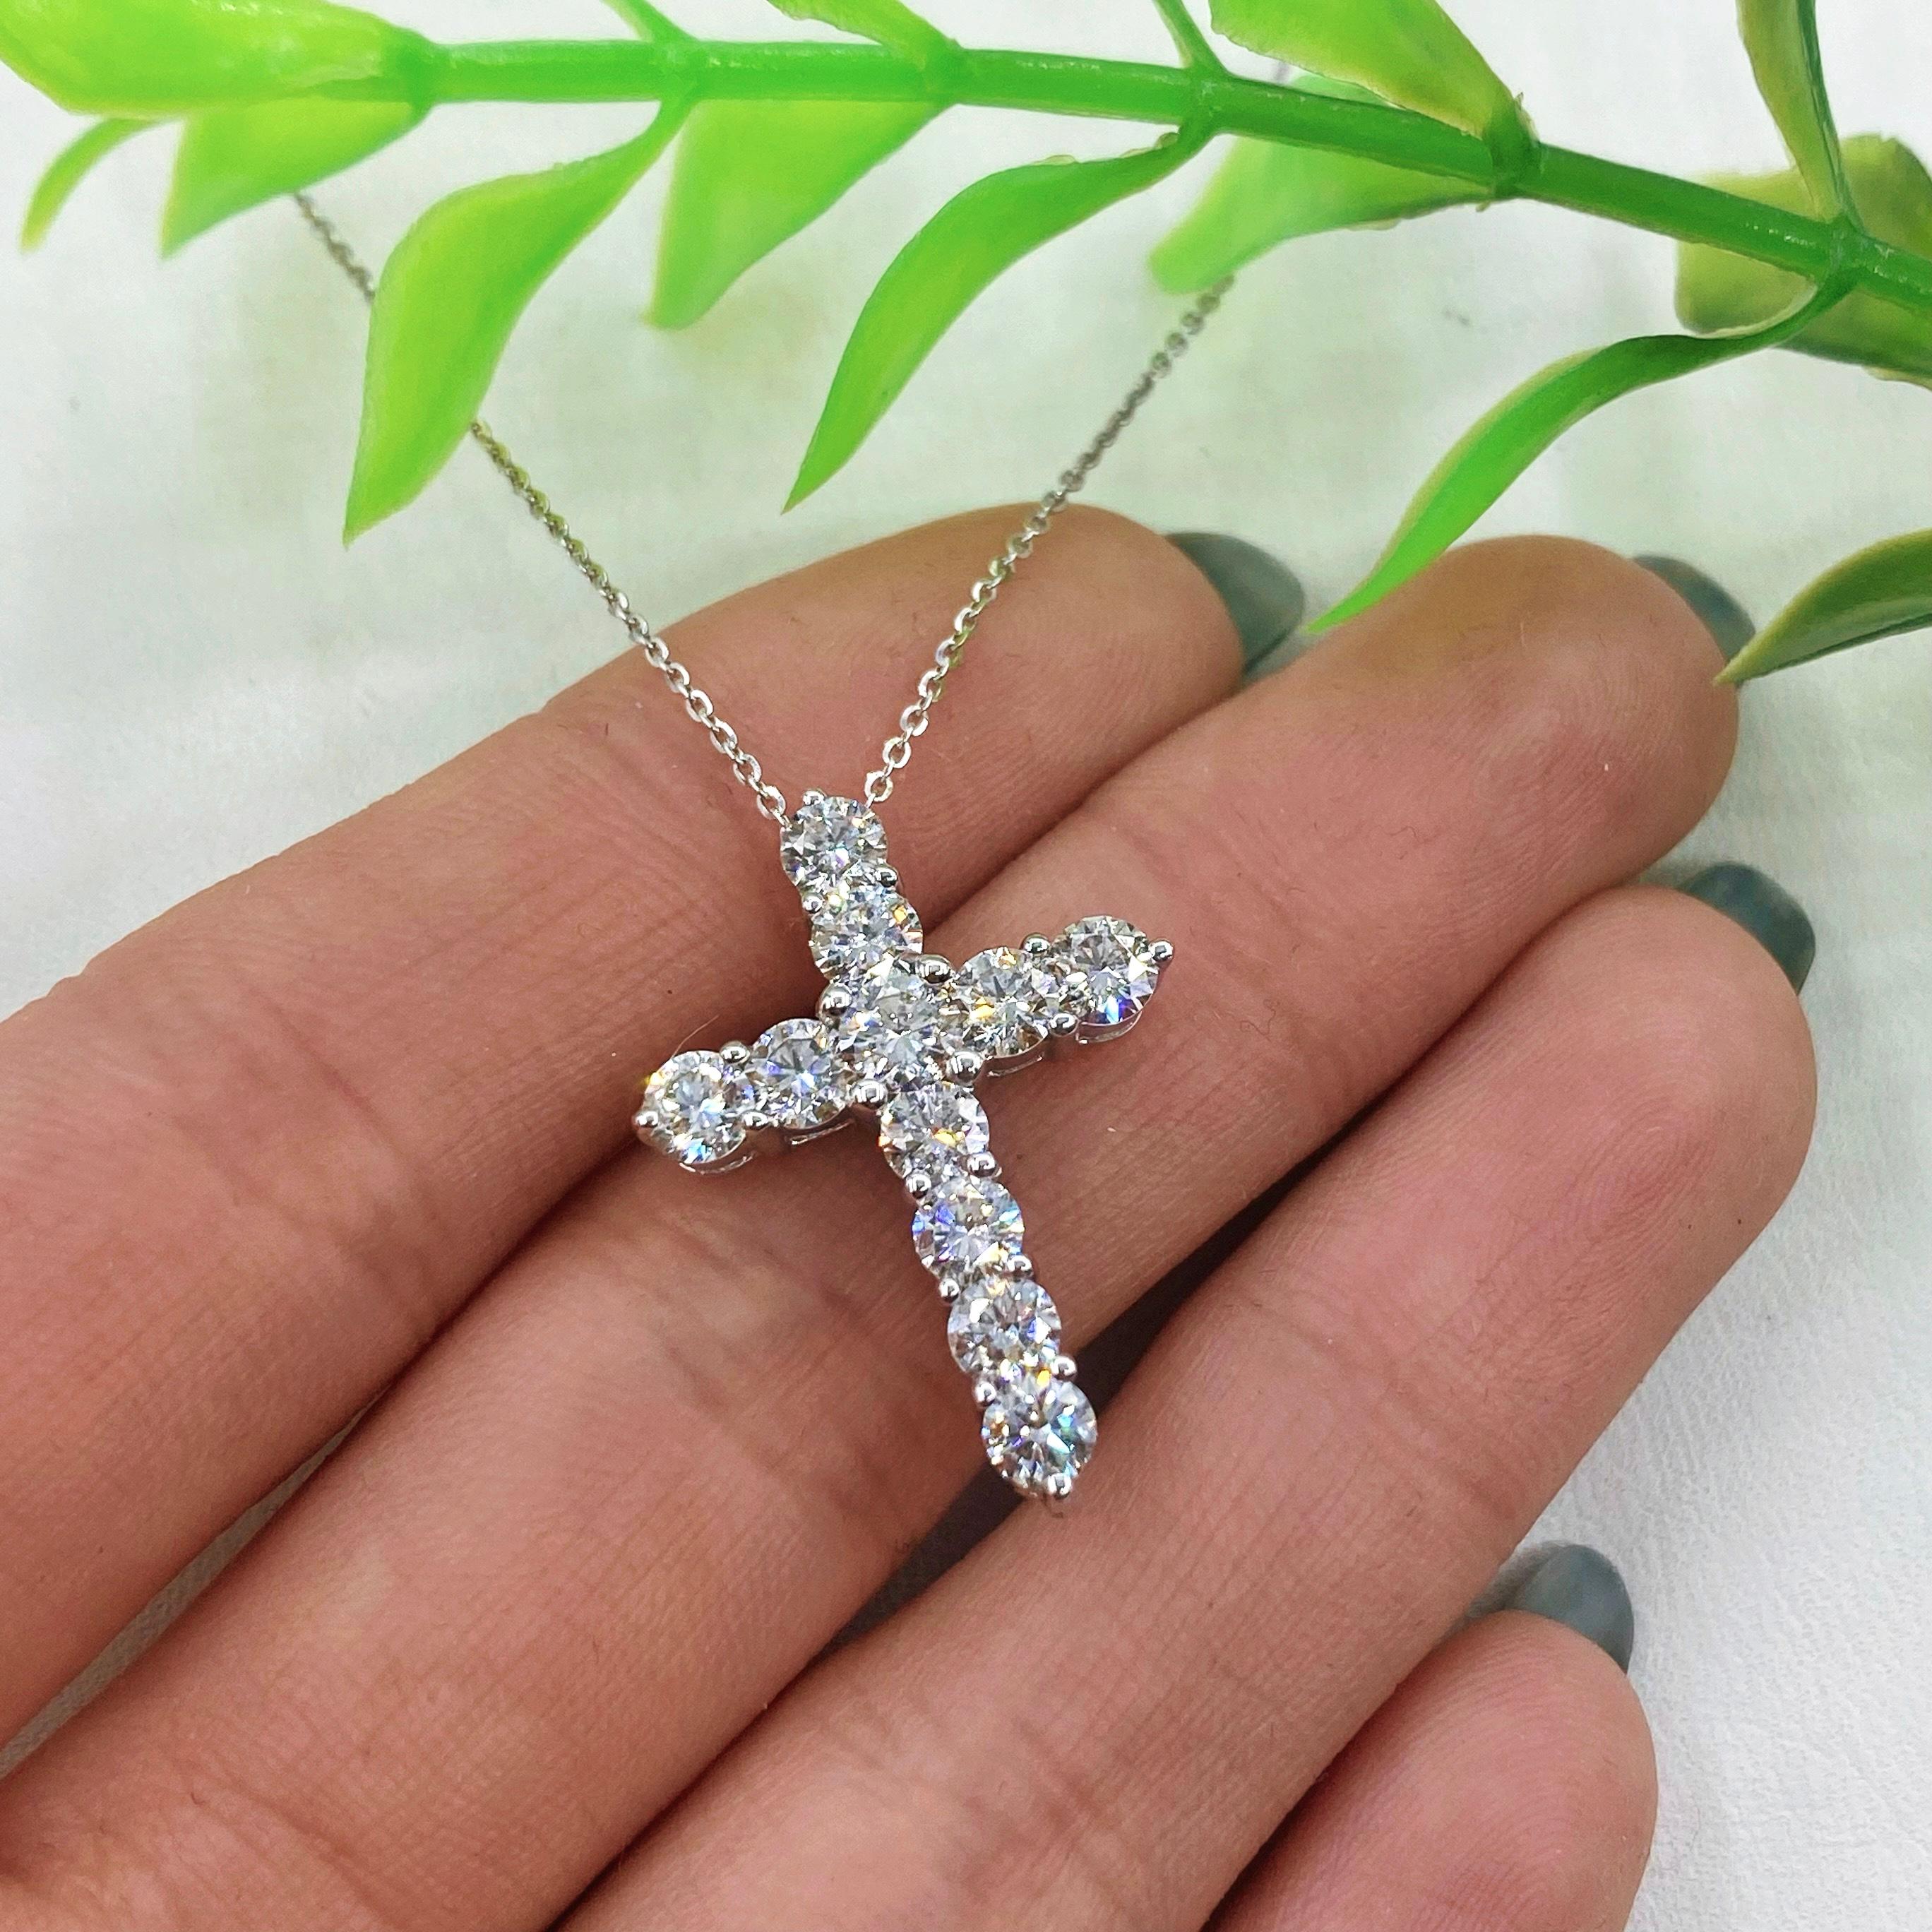 14kt Diamond Cross Pendant features 2.00ct Round cut diamonds.

The Number of Diamonds: 11

Diamonds Shape: Round

Diamonds: Natural

Claw: Lobster

VS2-SI1 Clarity

E-F Color